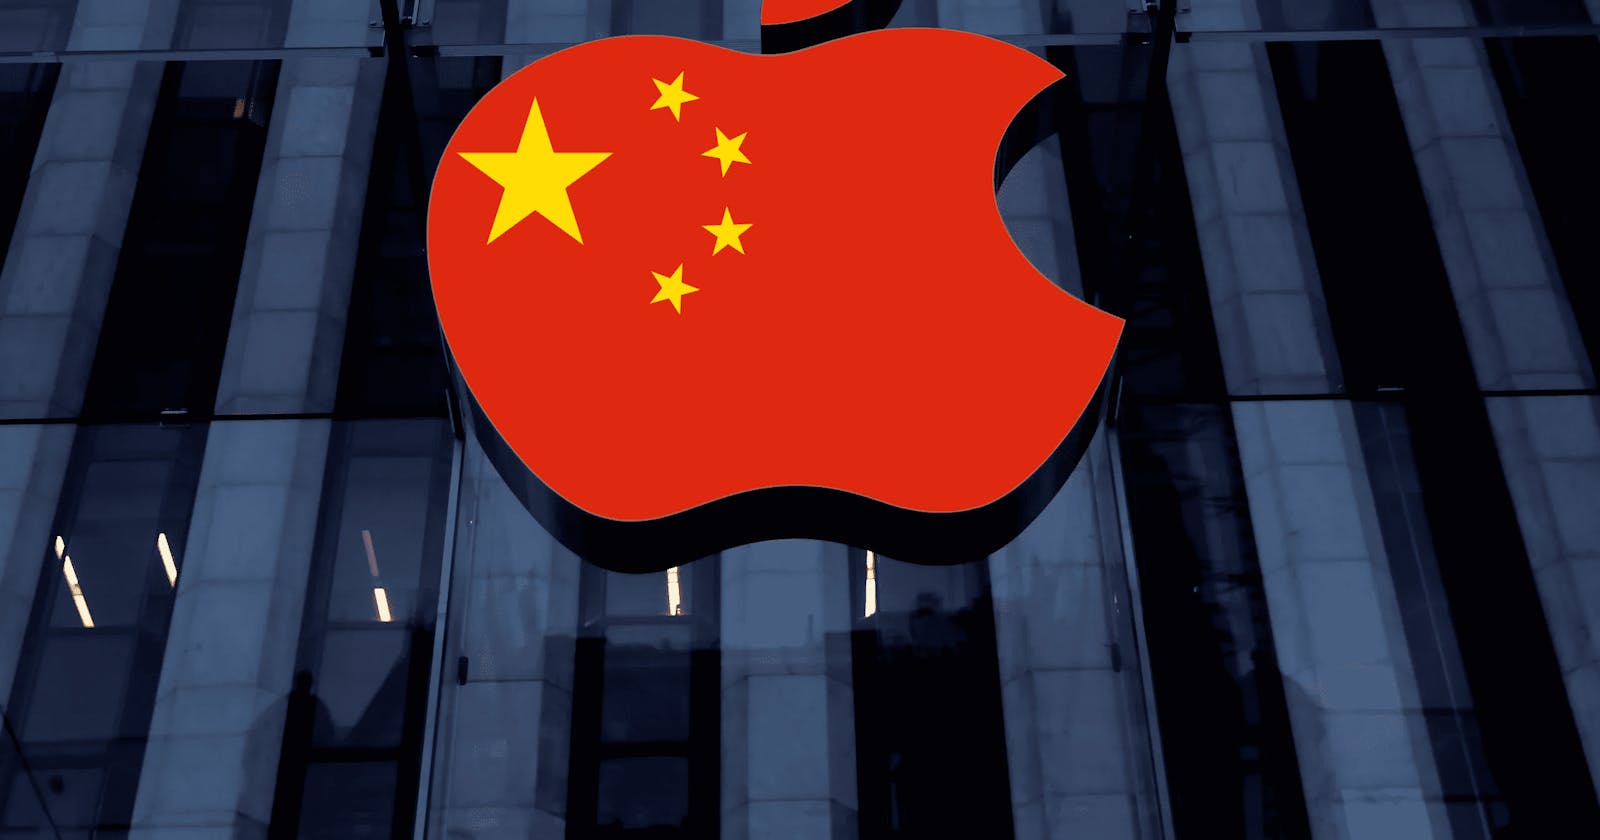 Apple Expands Chinese Censorship Again